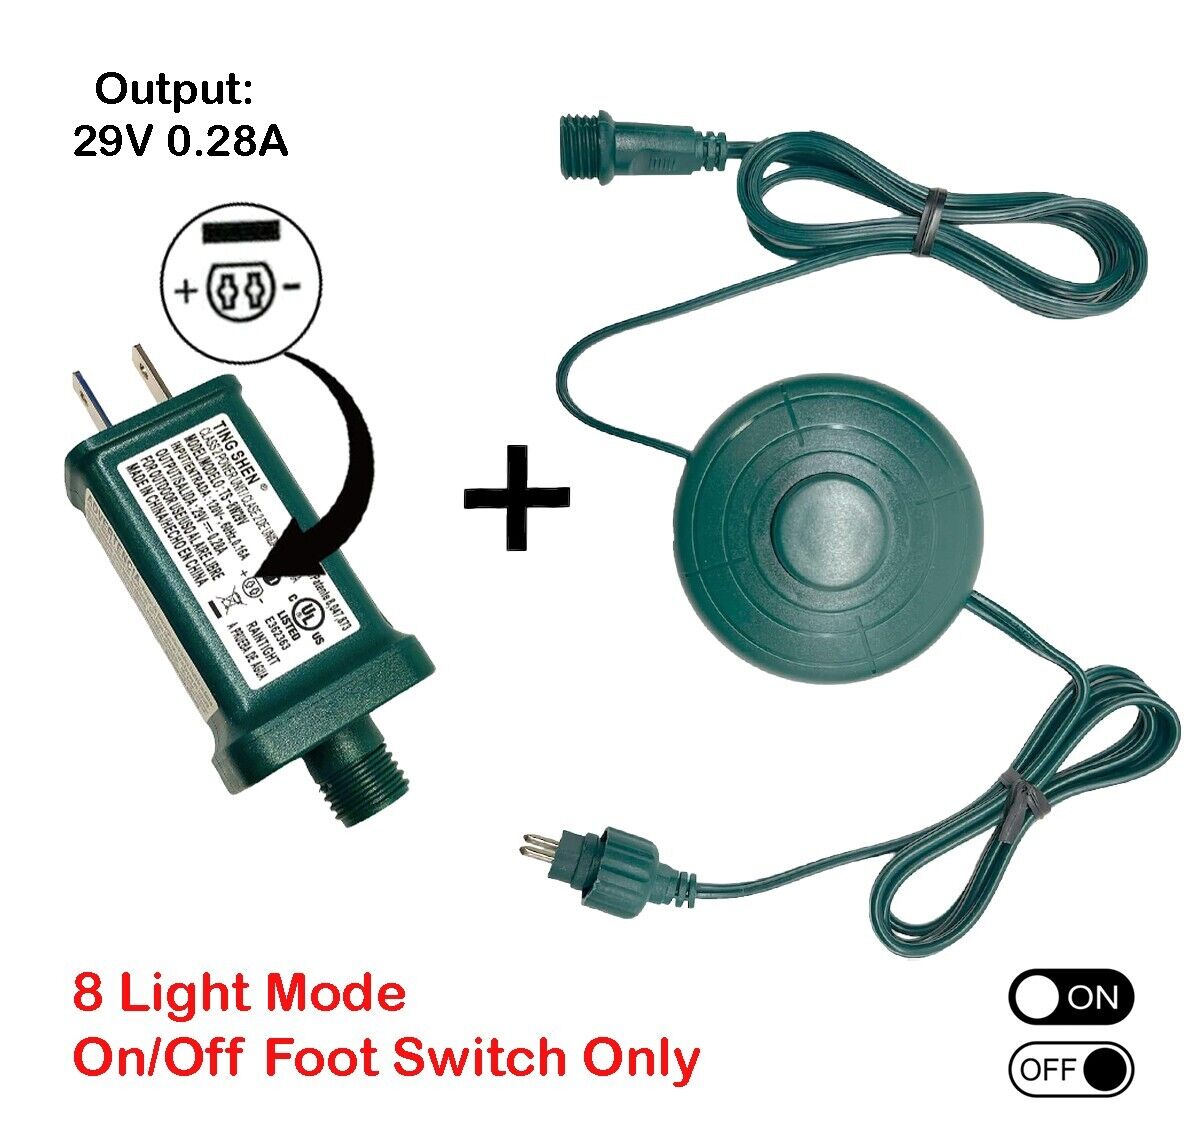 Set Adapter DC 29V 0.28A + Power Cord Foot Switch 1/2in Plug 6Ft - 8 LIGHT MODE